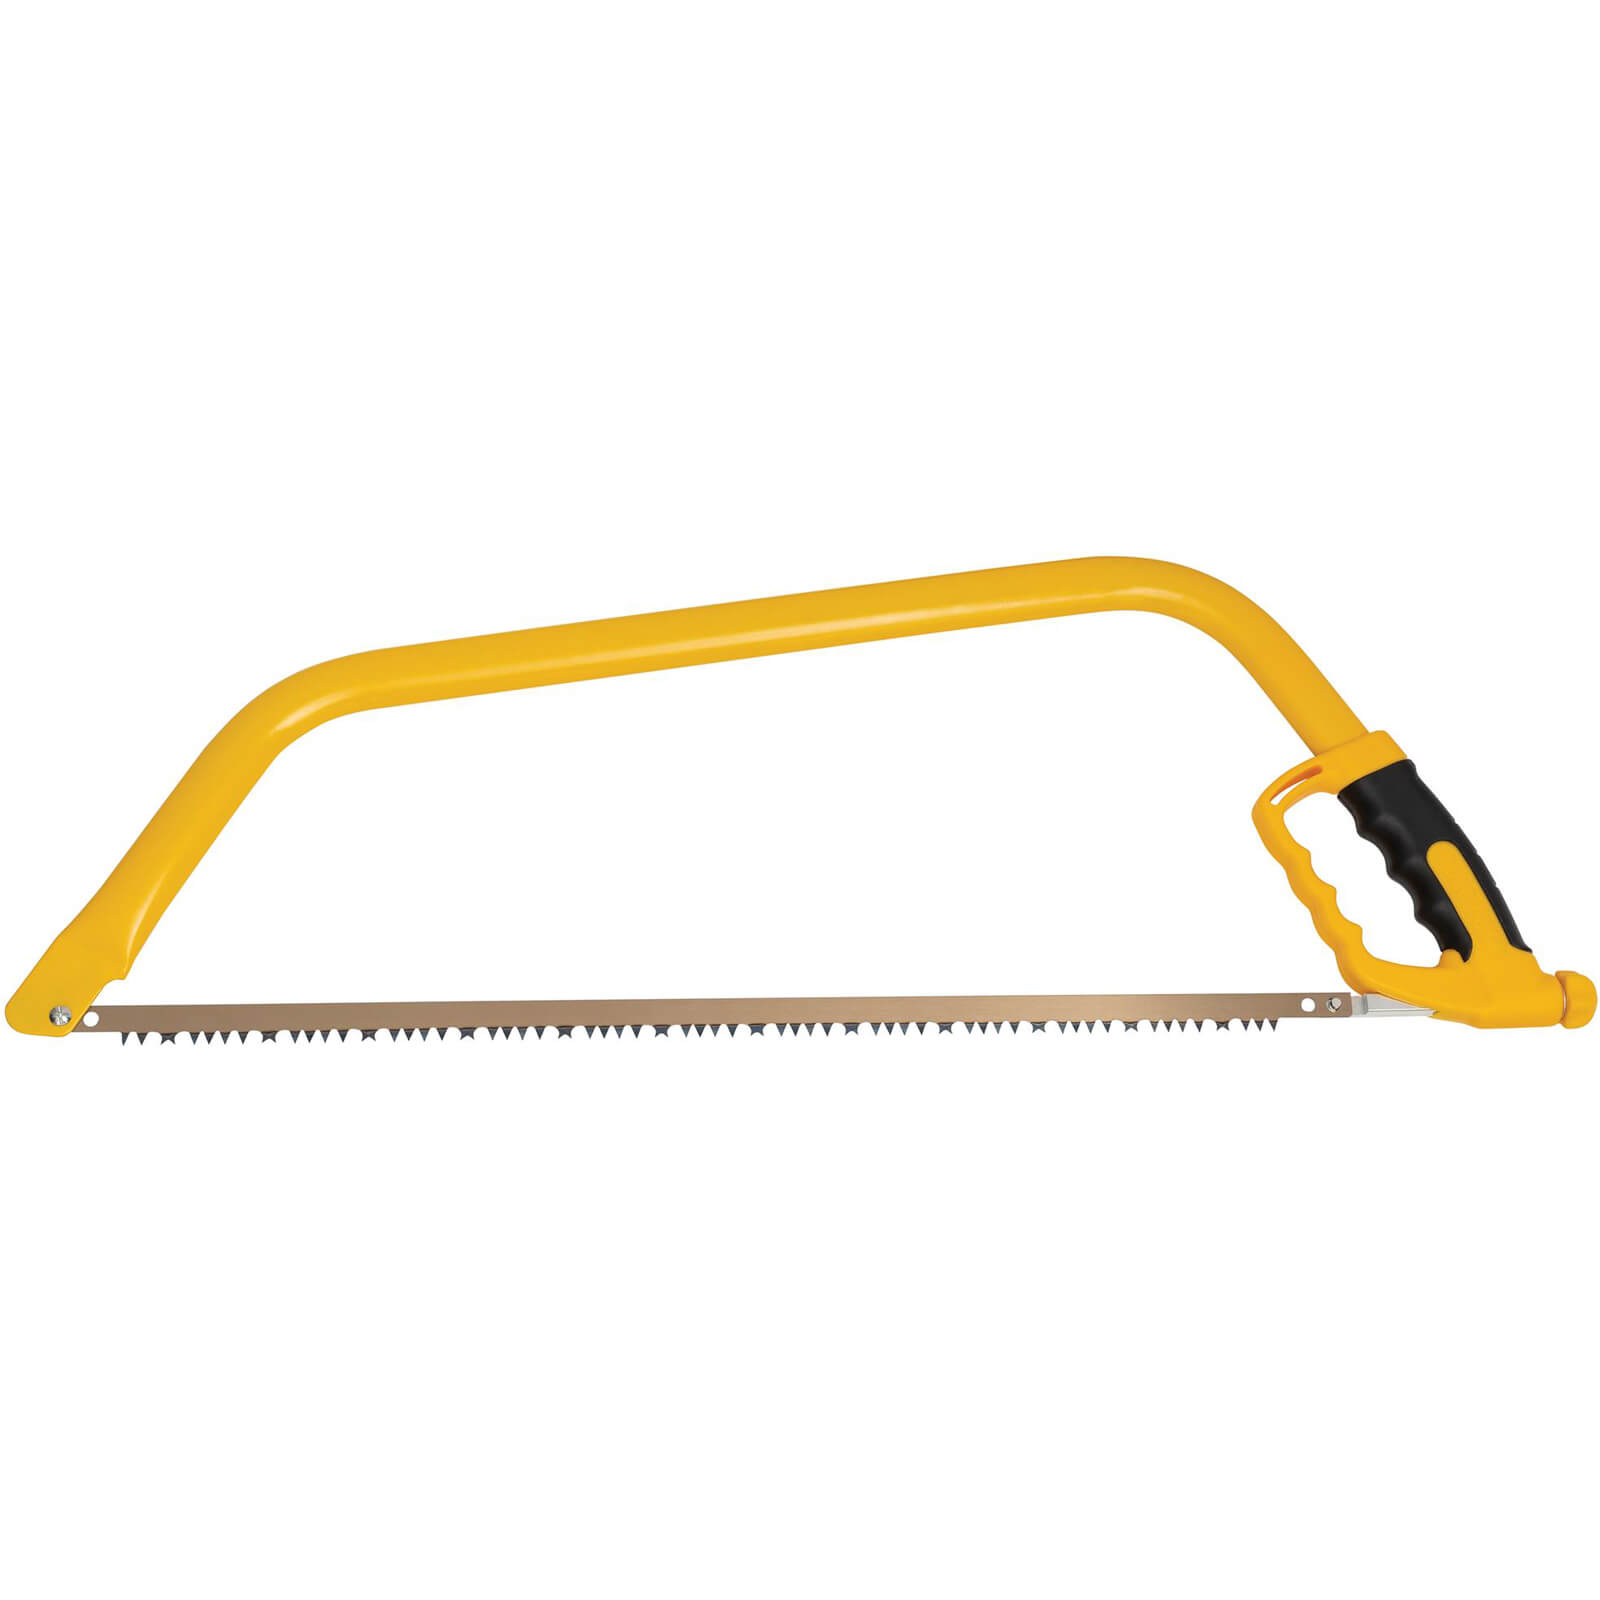 Image of Roughneck Bow Saw with Soft Grip Handle 24" / 600mm